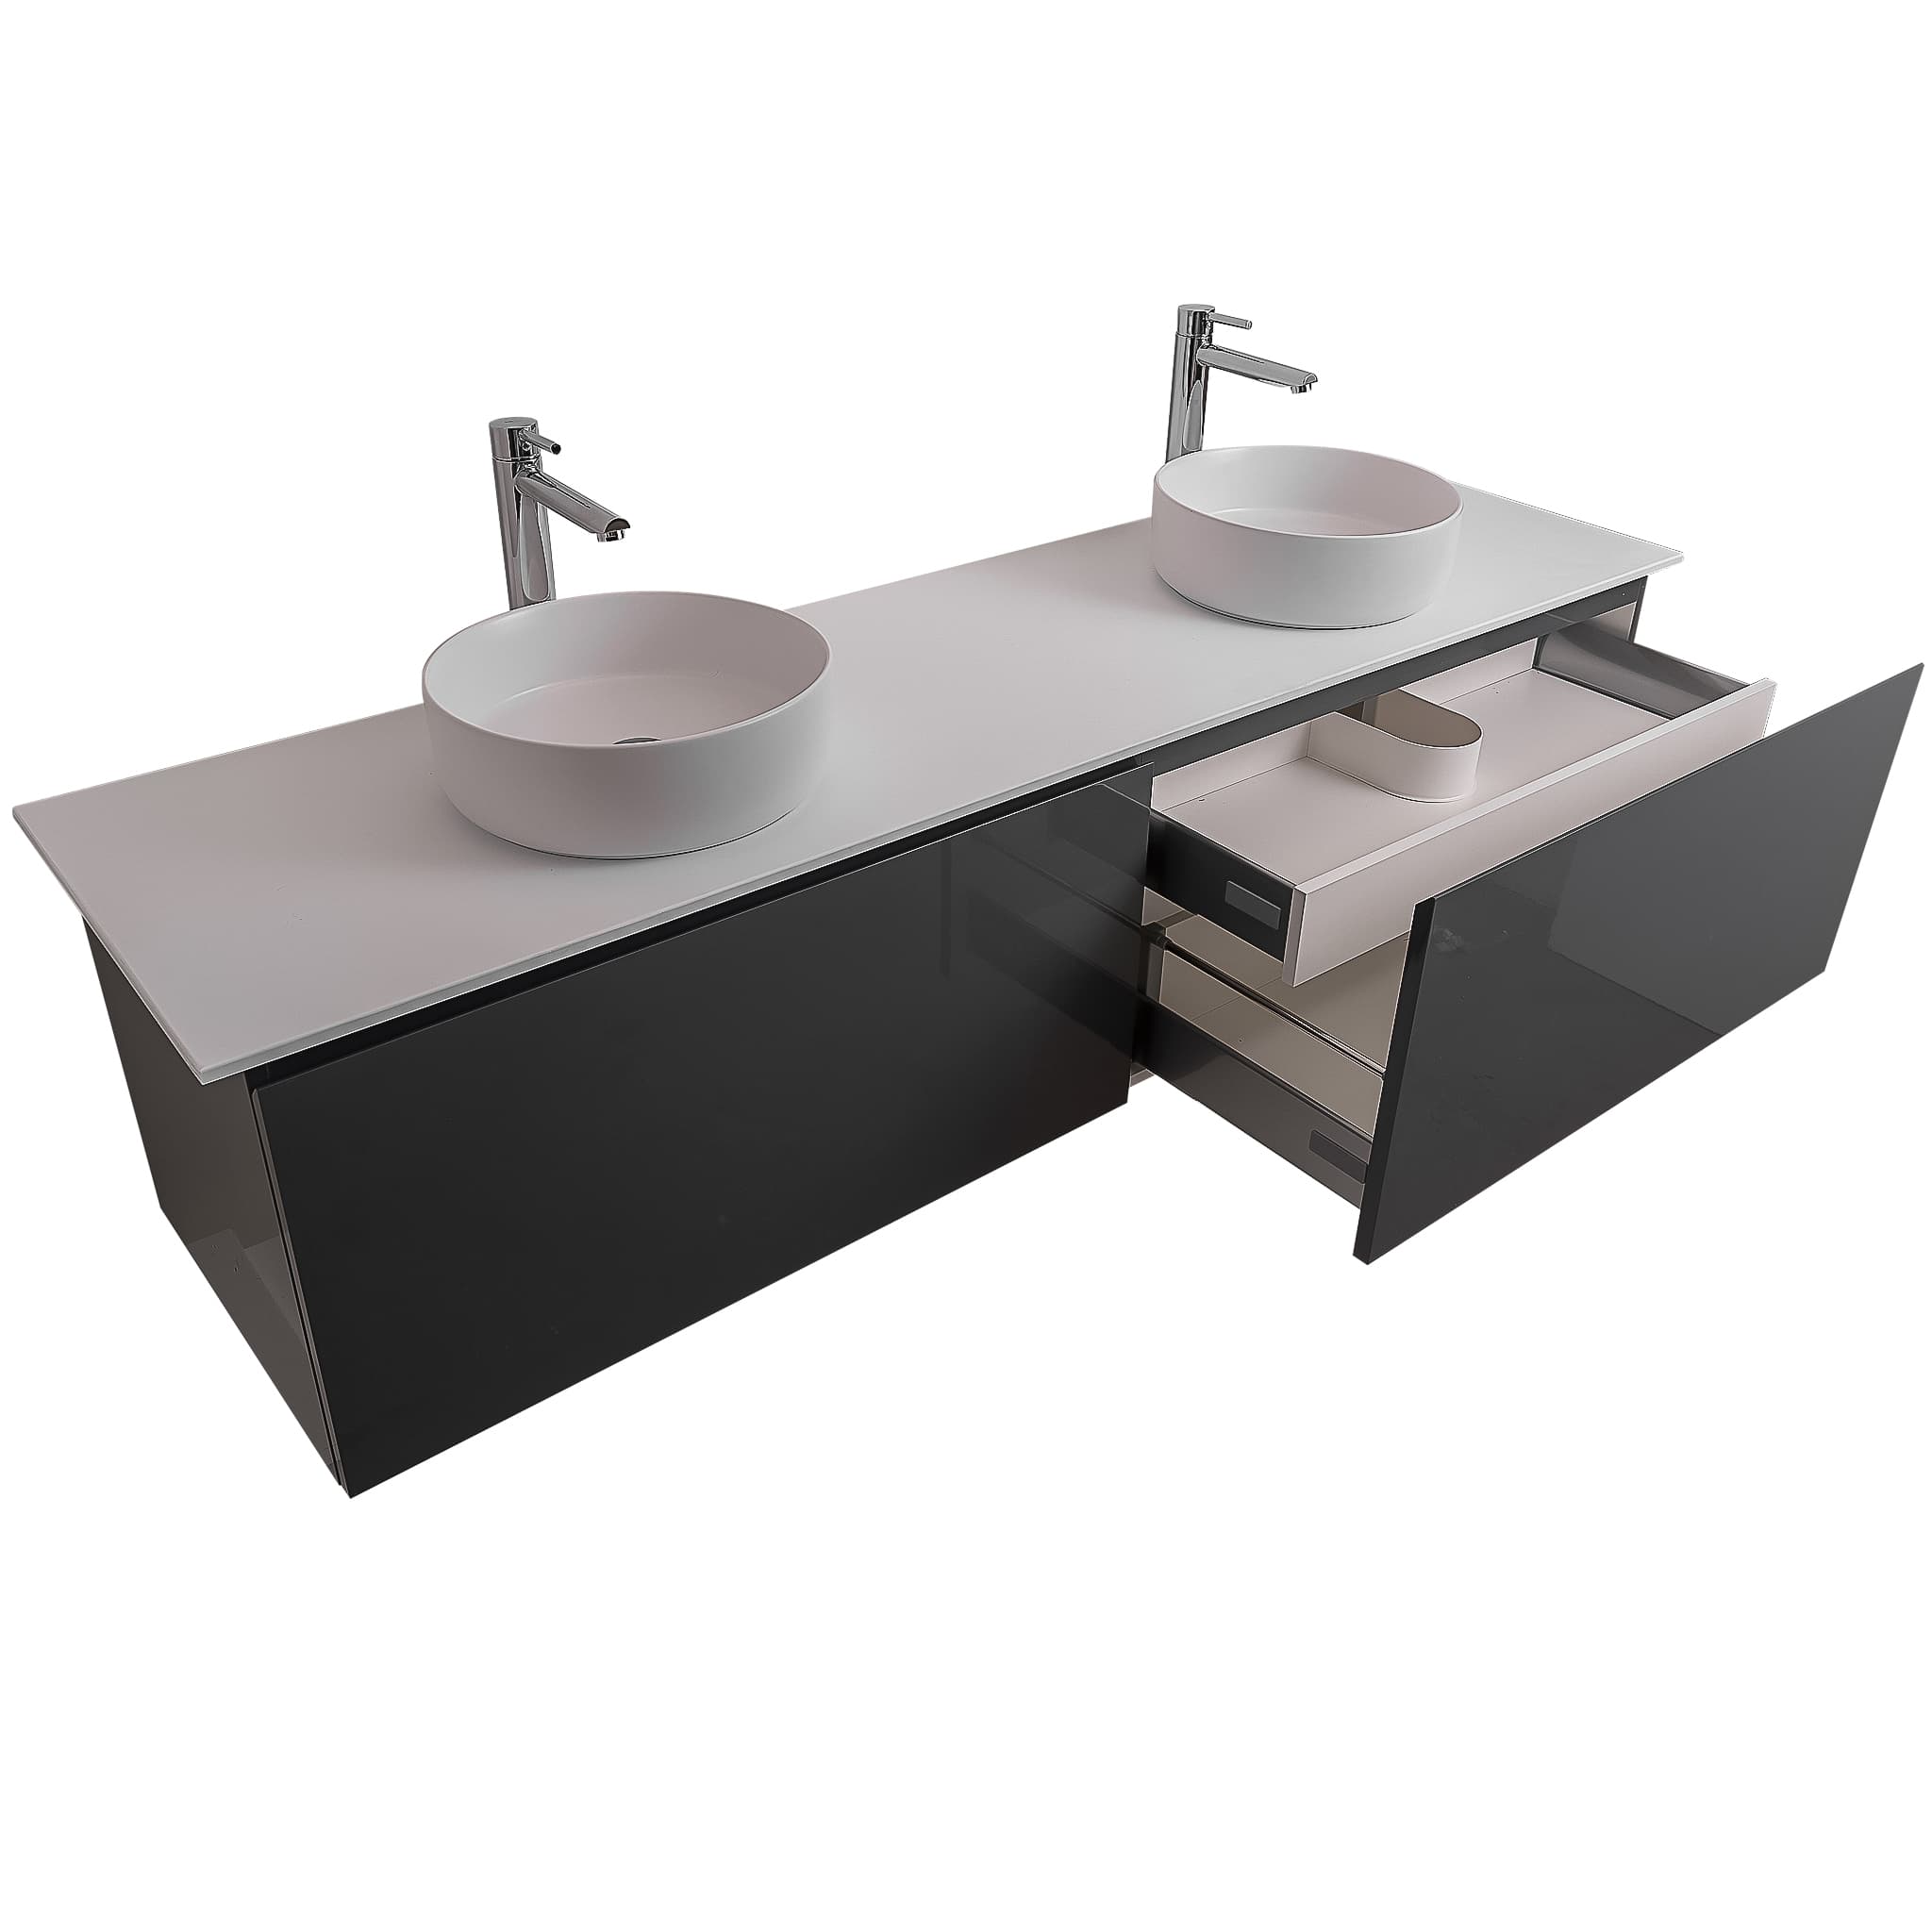 Venice 63 Anthracite High Gloss Cabinet,  Ares White Top And Two Ares White Ceramic Basin, Wall Mounted Modern Vanity Set